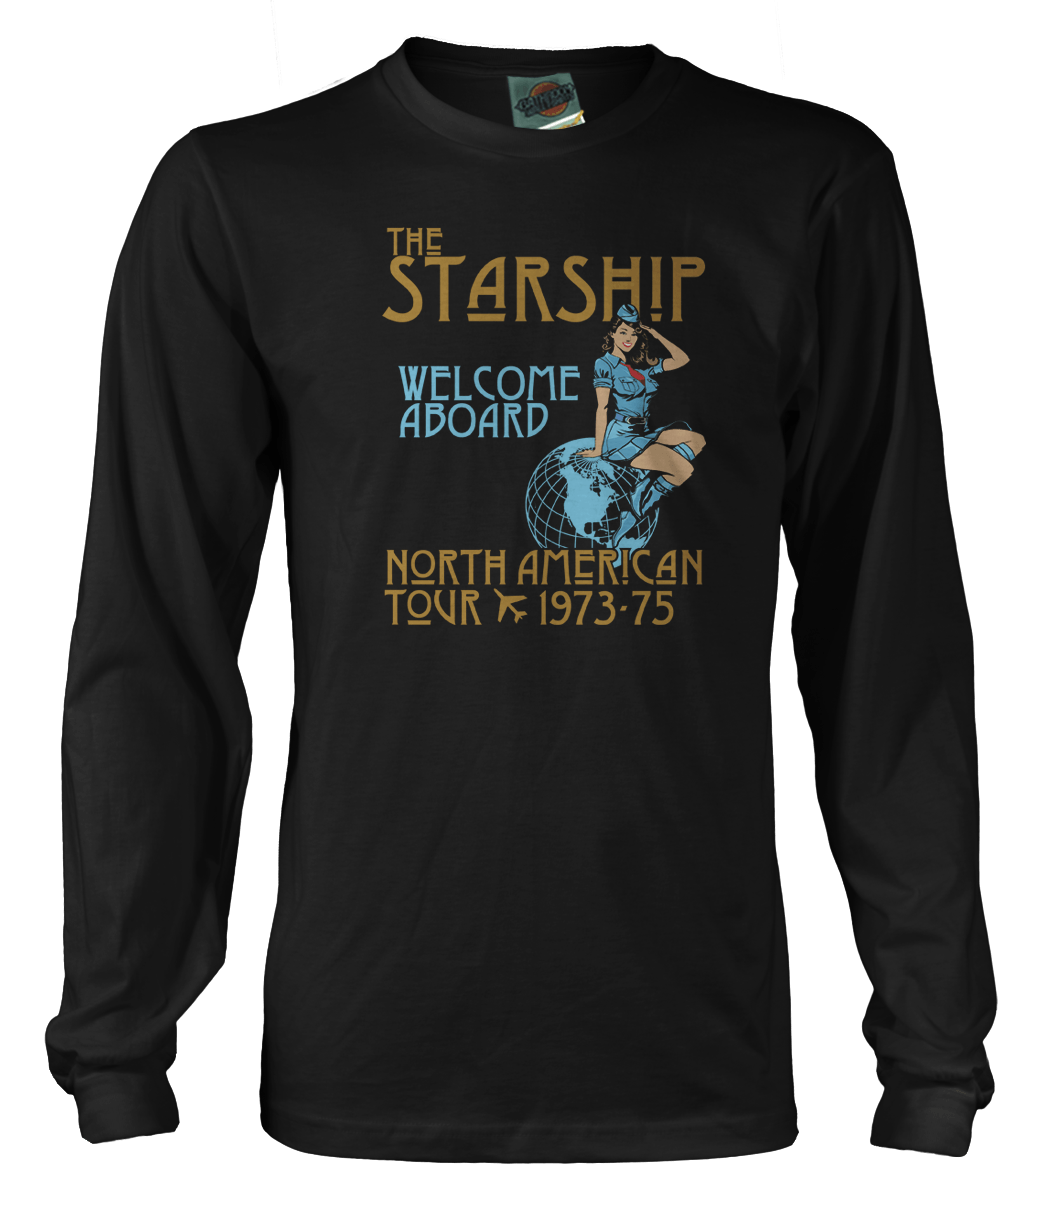 LED ZEPPELIN inspired STARSHIP 1973-75 US TOUR T-Shirt | bathroomwall